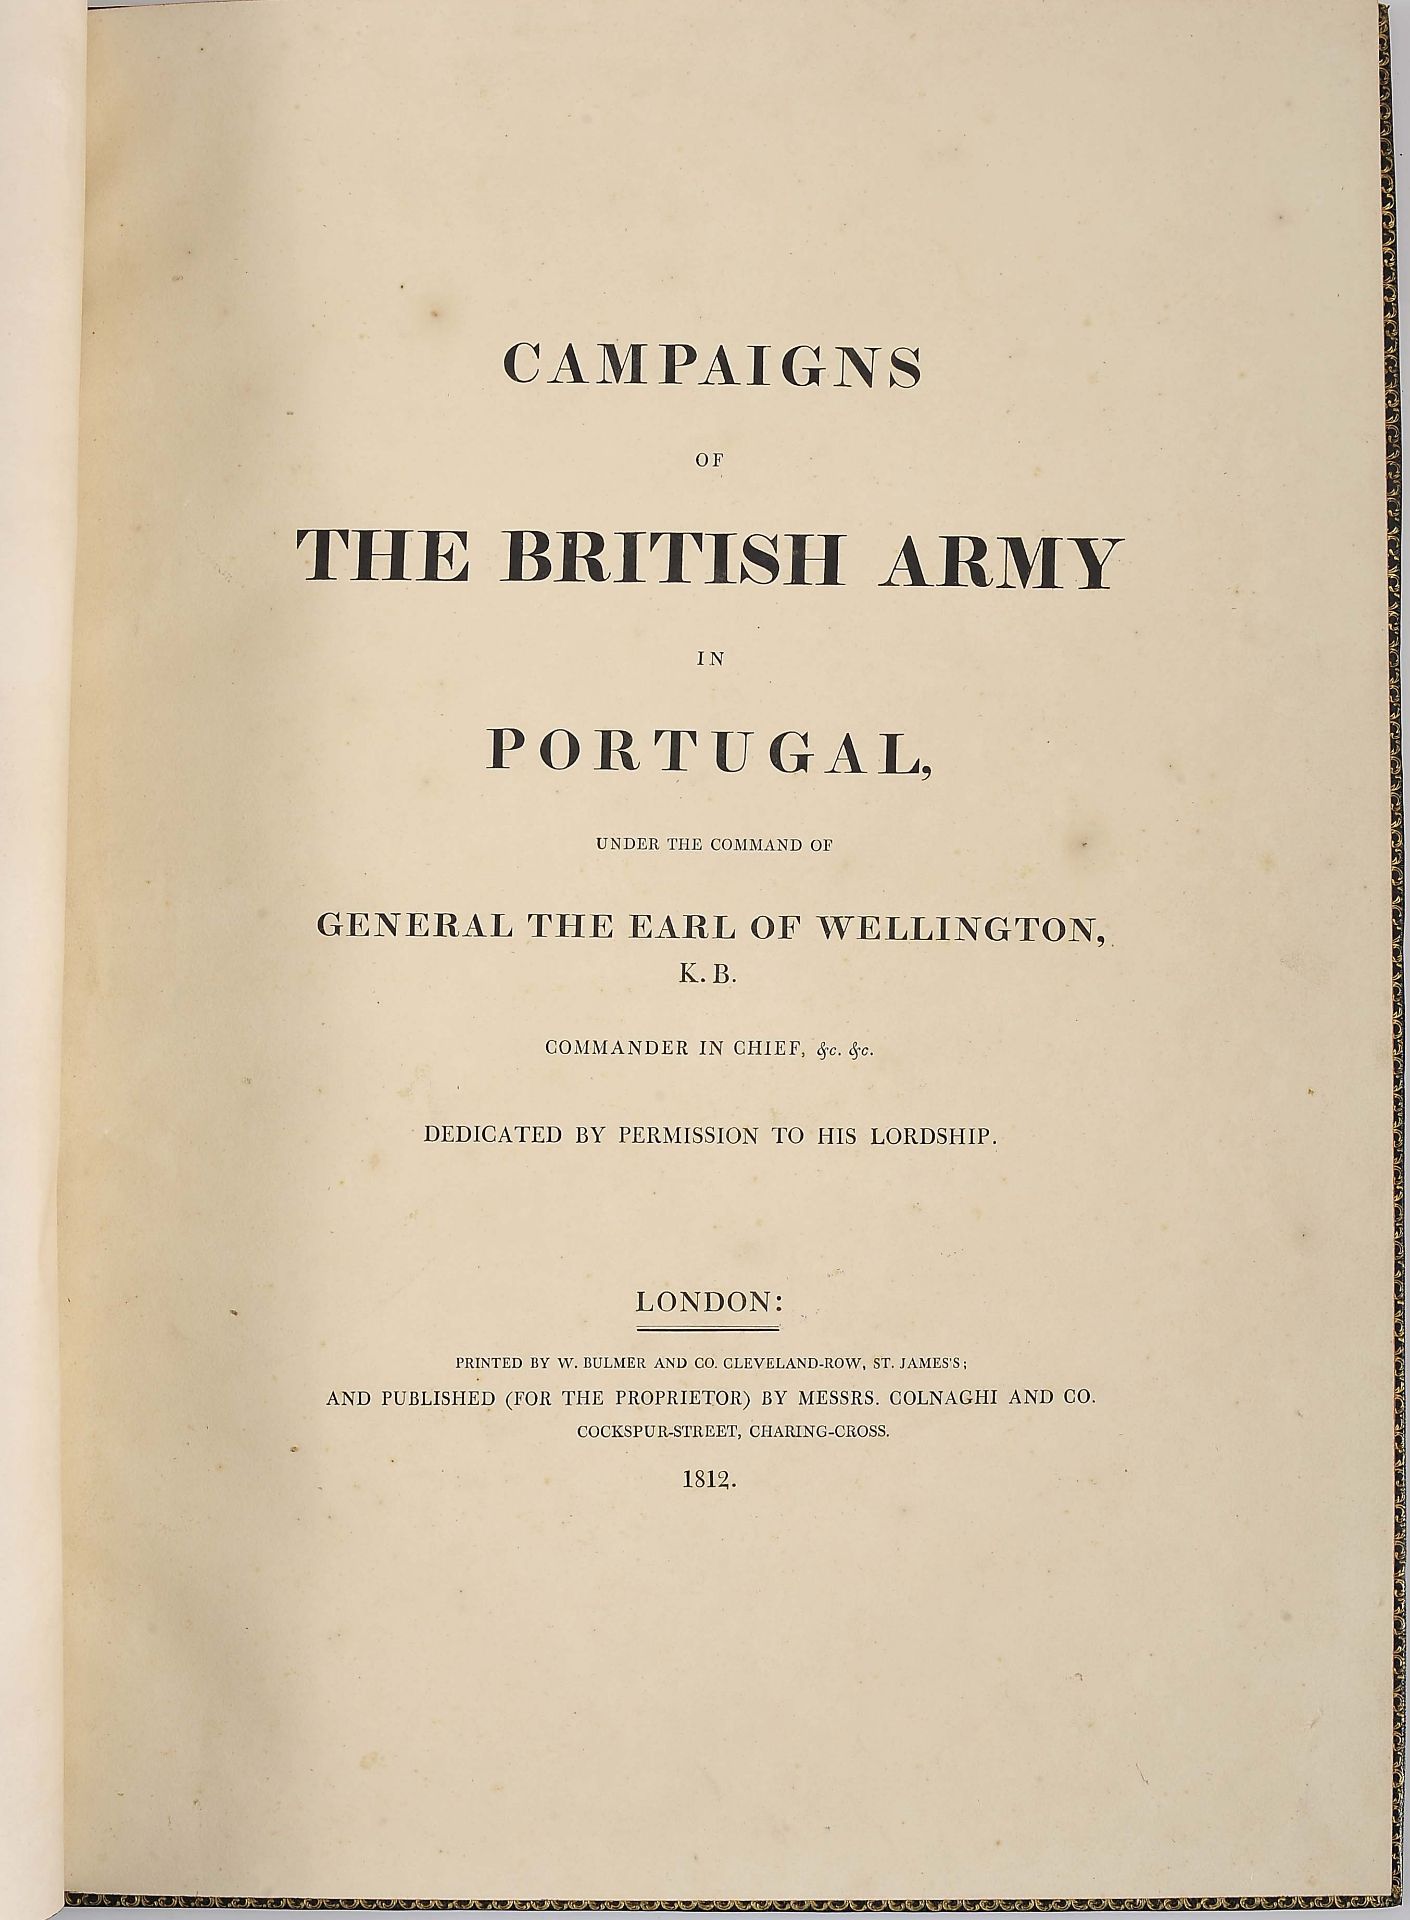 [L'EVEQUE, Henry].- Campaigns of the British Army in Portugal, under the command of General The Earl